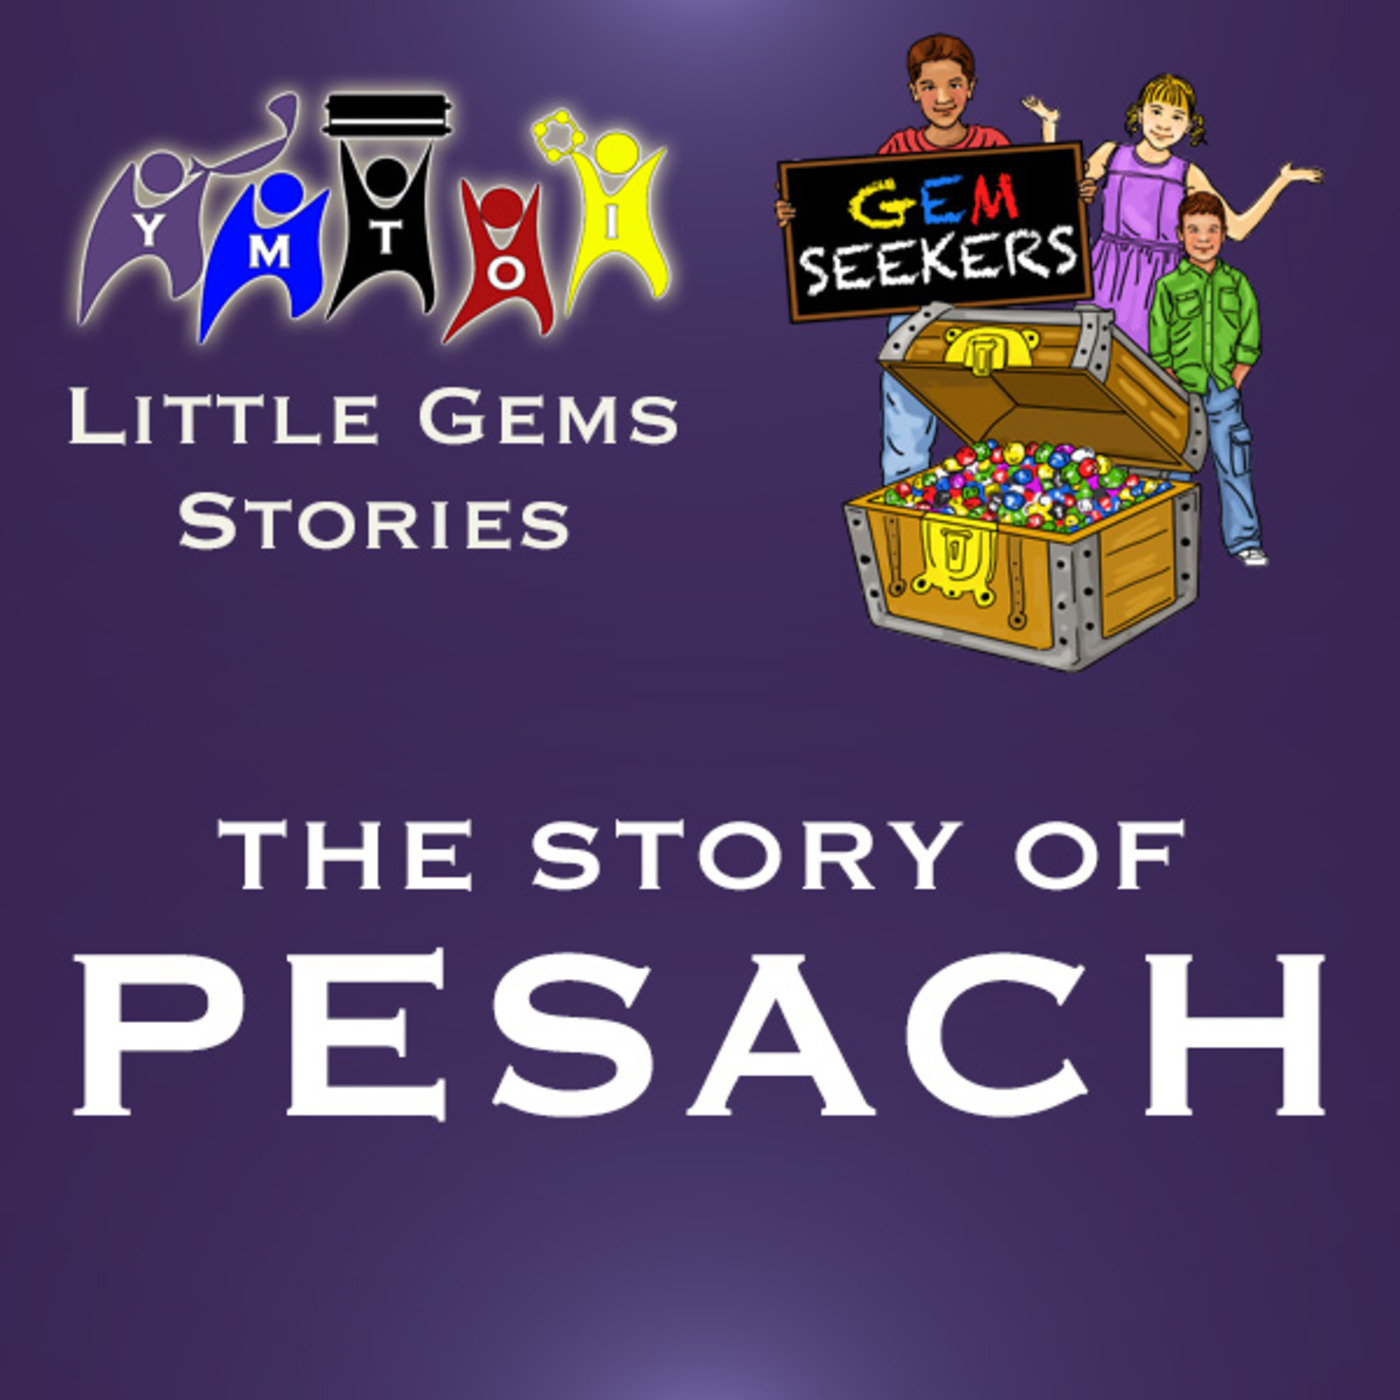 Episode 732: YMTOI Little Gems Stories Pesach/Chag HaMatzot Edition | The Story of Pesach